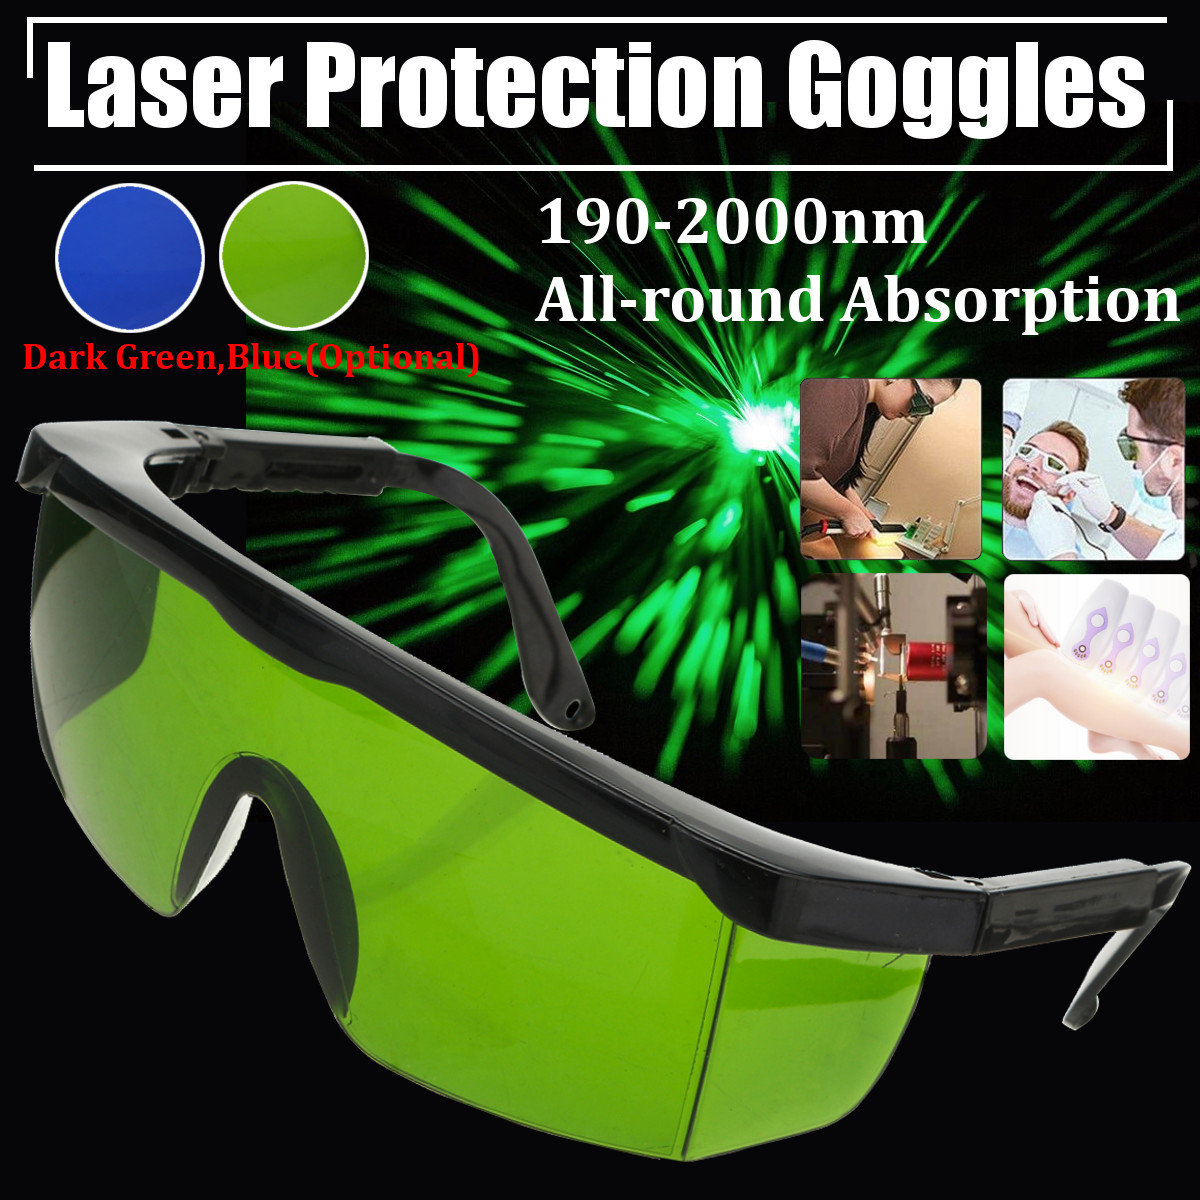 Pro-Laser-Protection-Goggles-Protective-Safety-Glasses-IPL-OD4D-190nm-2000nm-Laser-Goggles-1424199-2